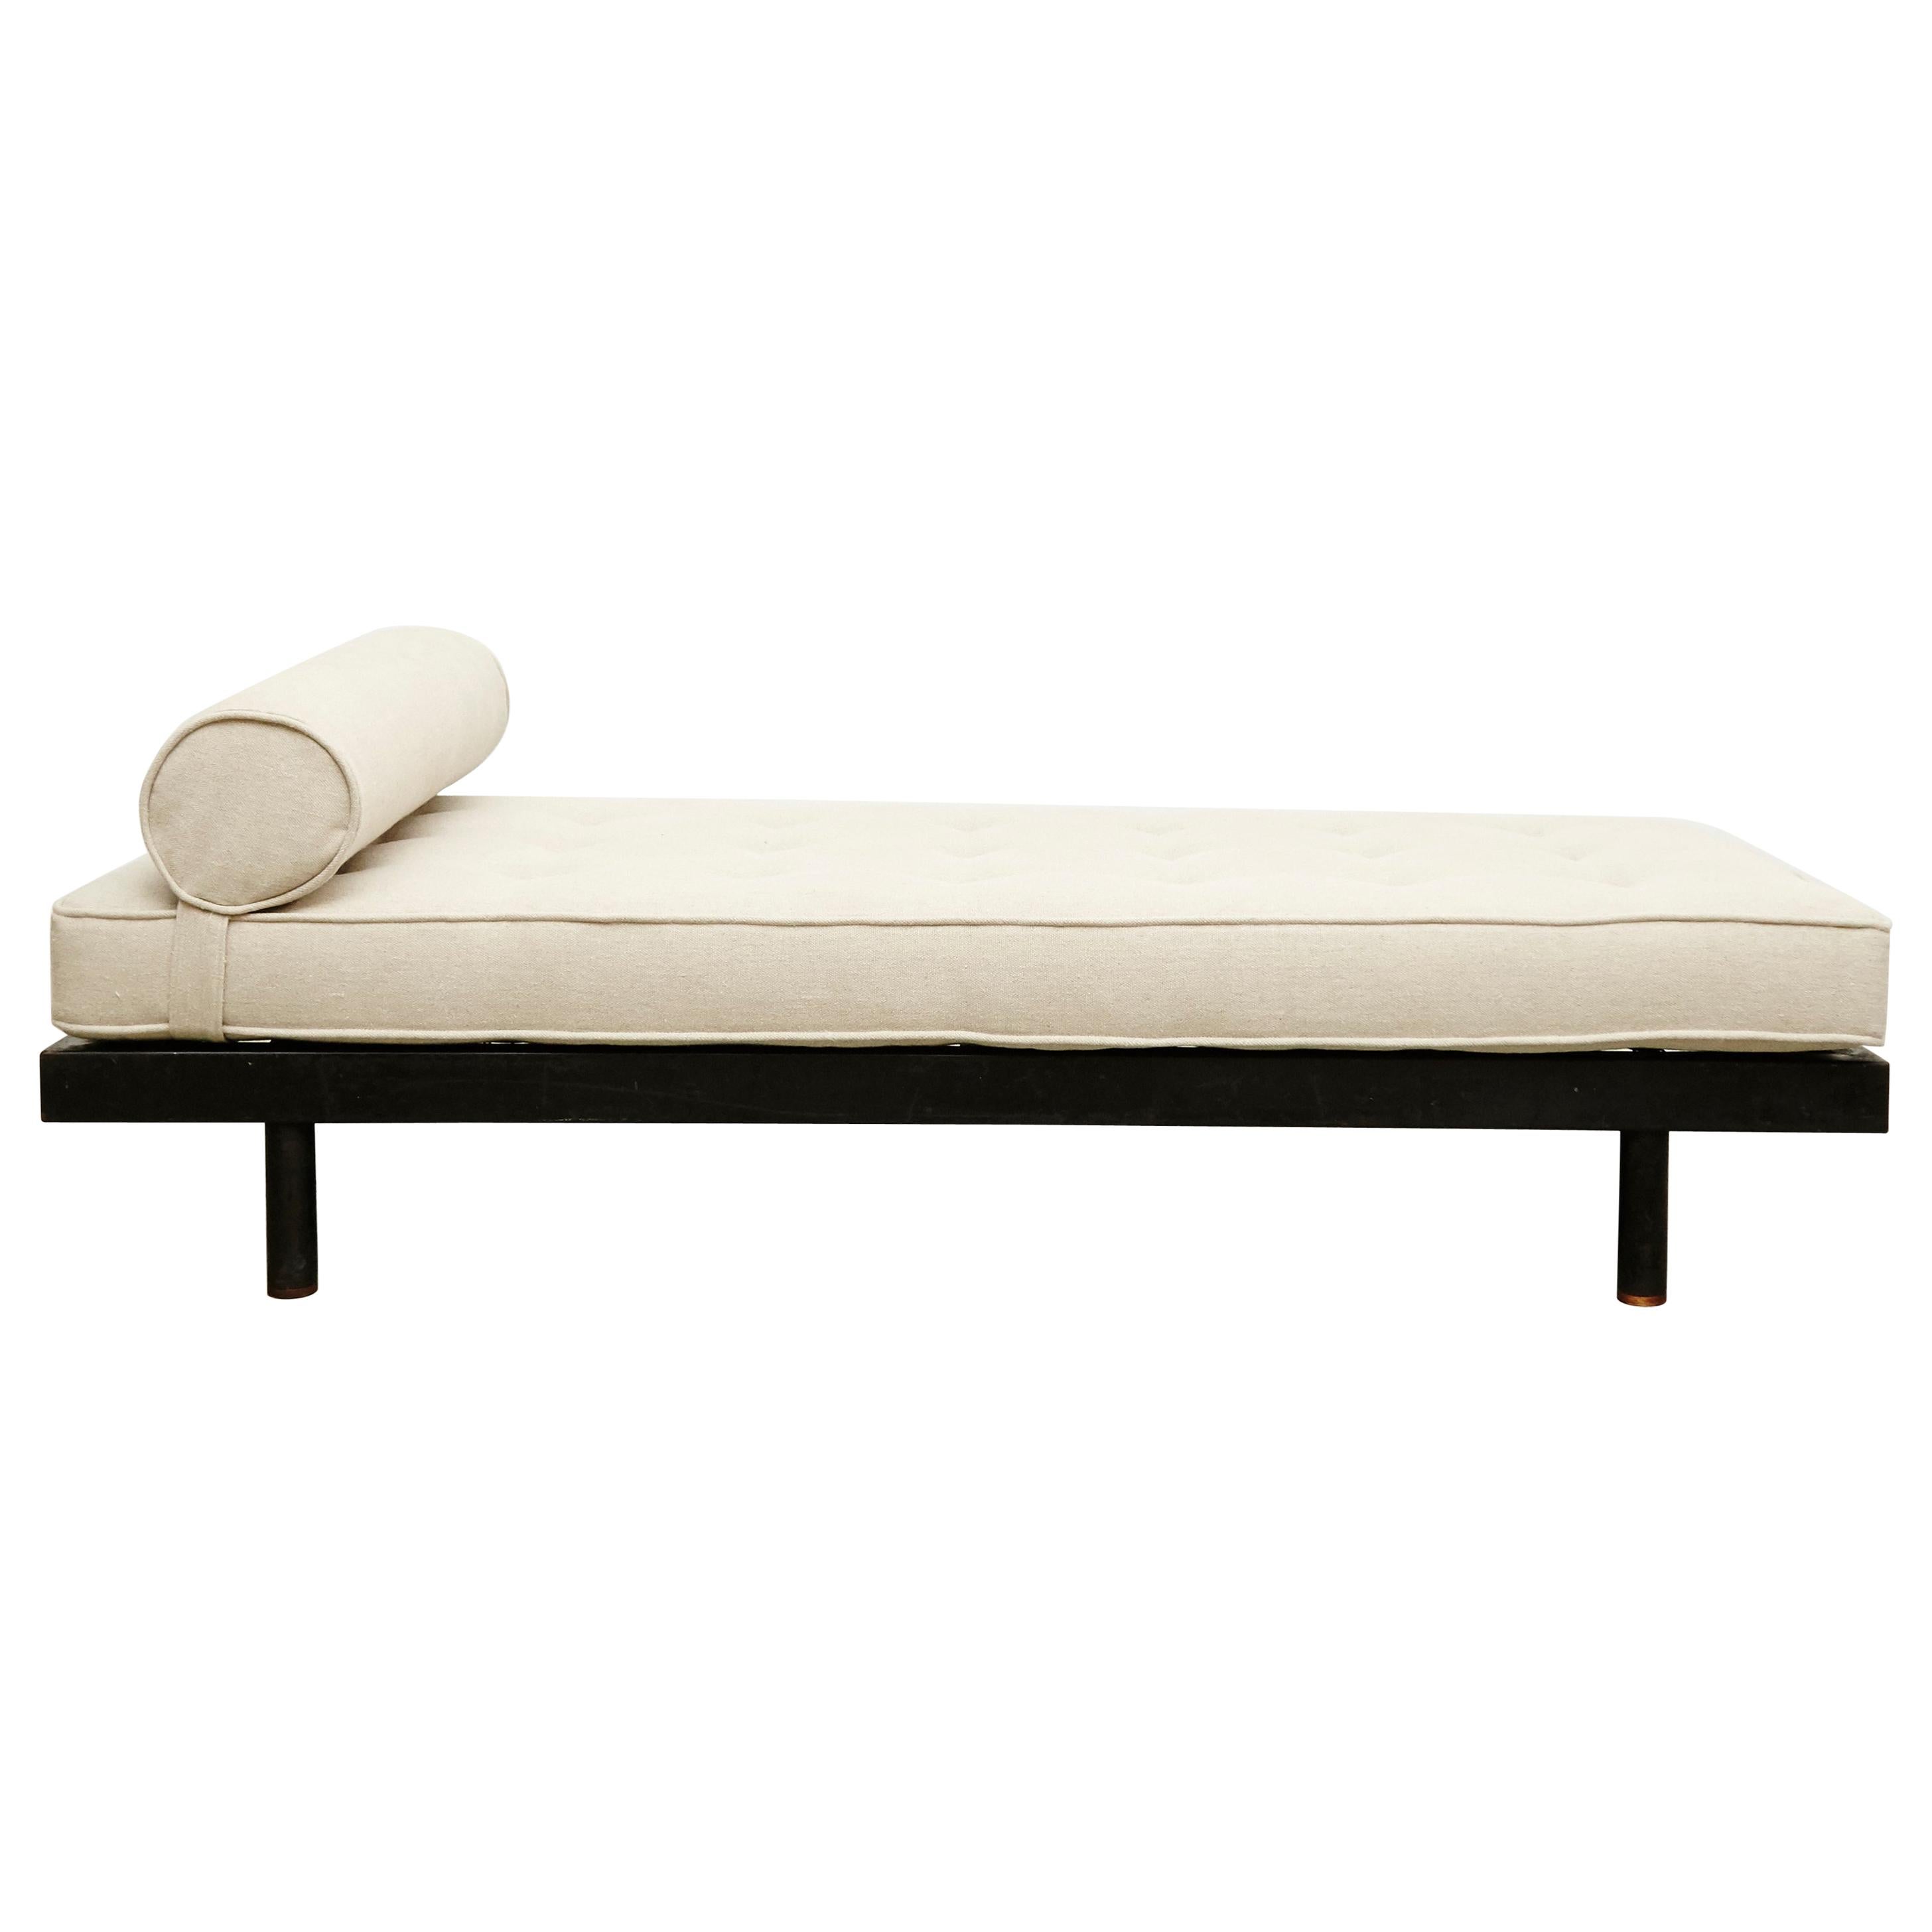 Jean Prouve Daybed in Black Metal, circa 1950 at 1stDibs